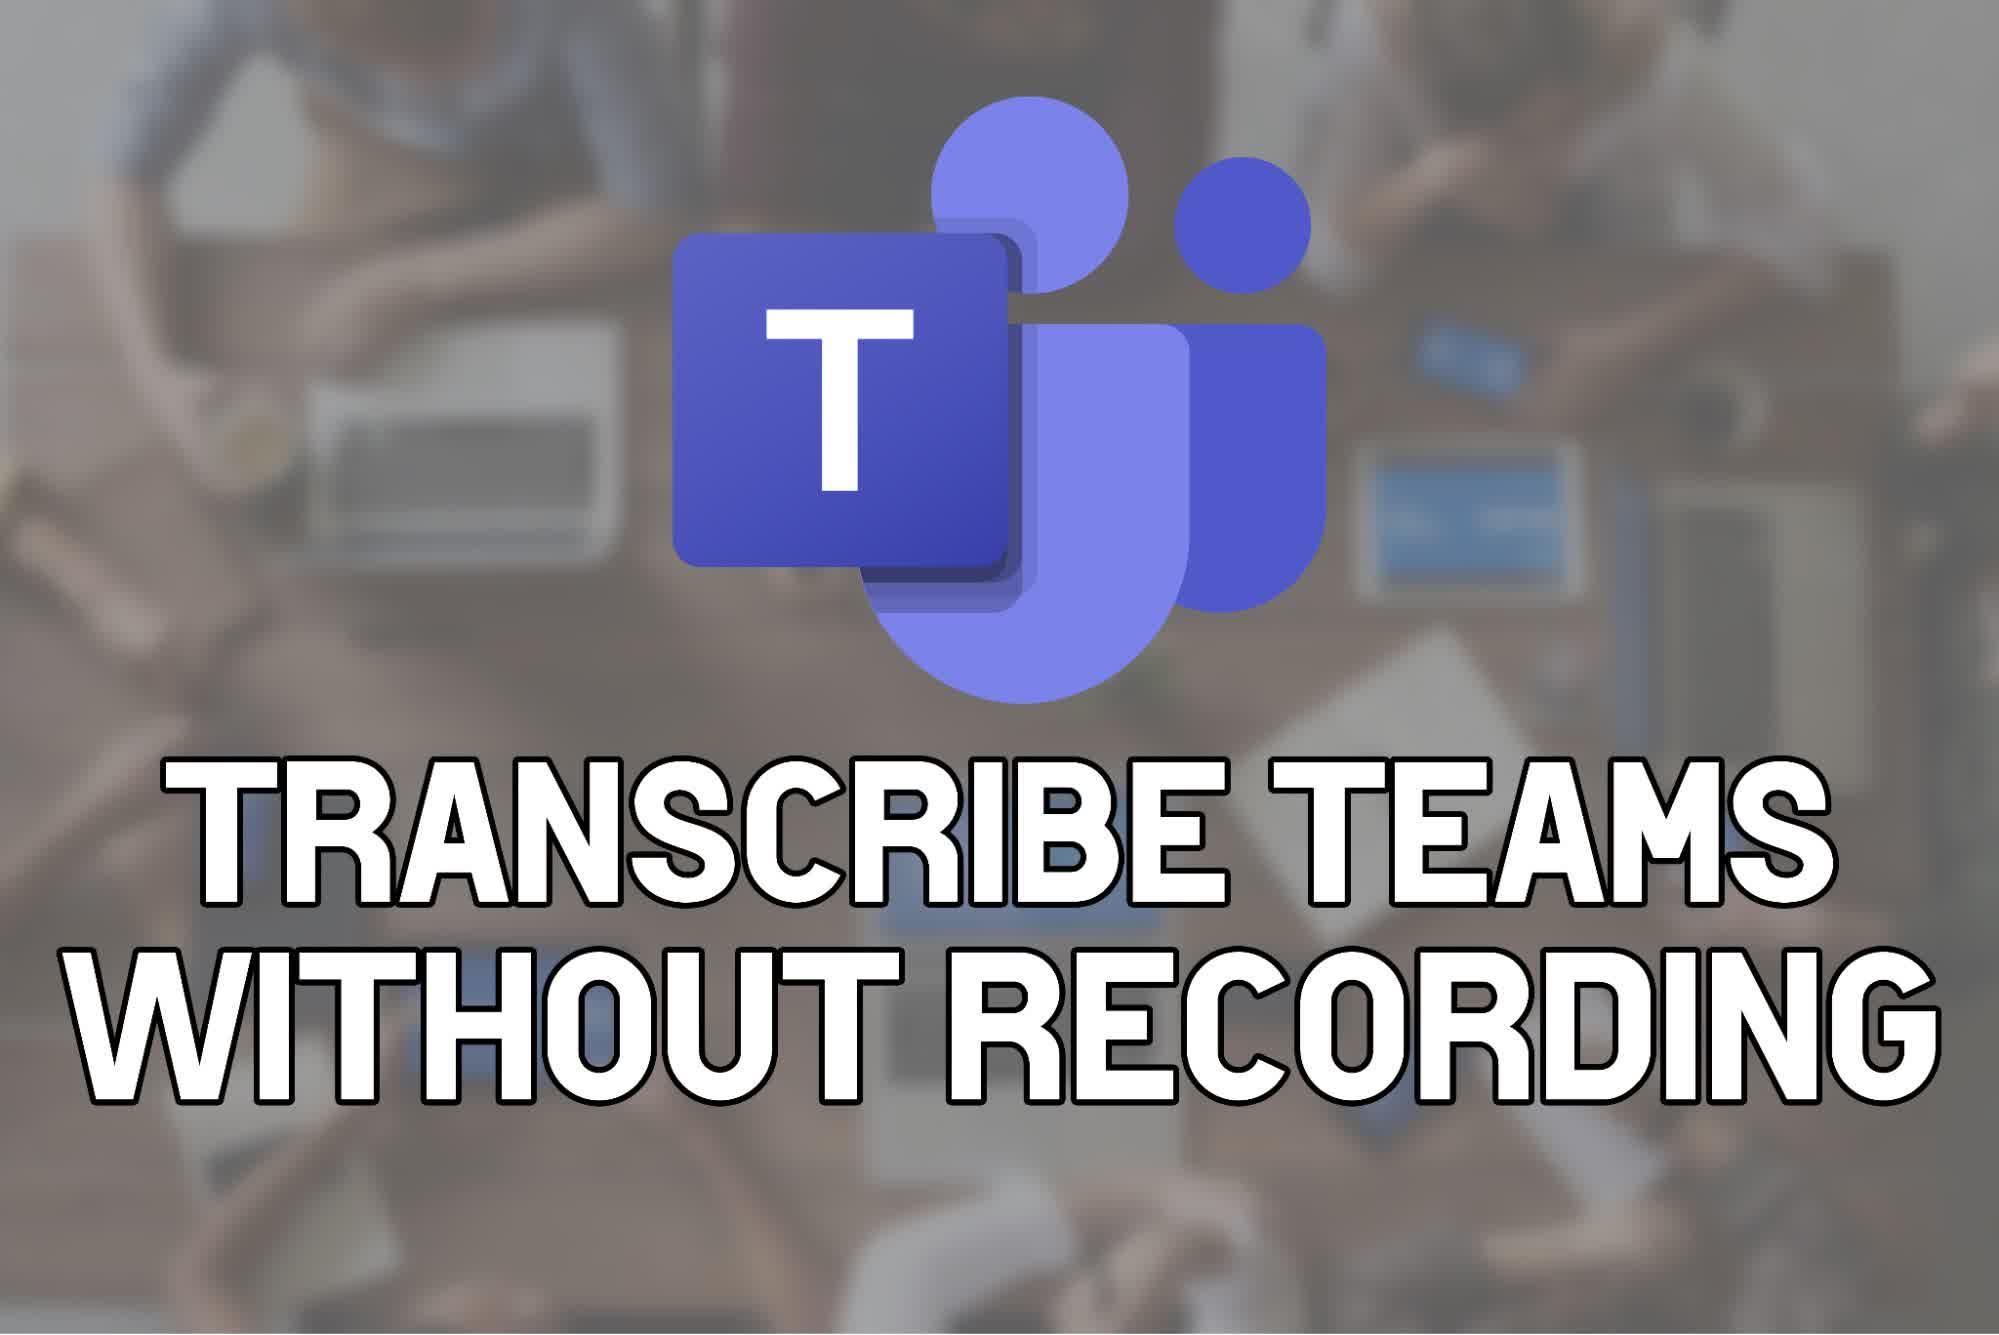 Transcribe a Teams Meeting without Recording